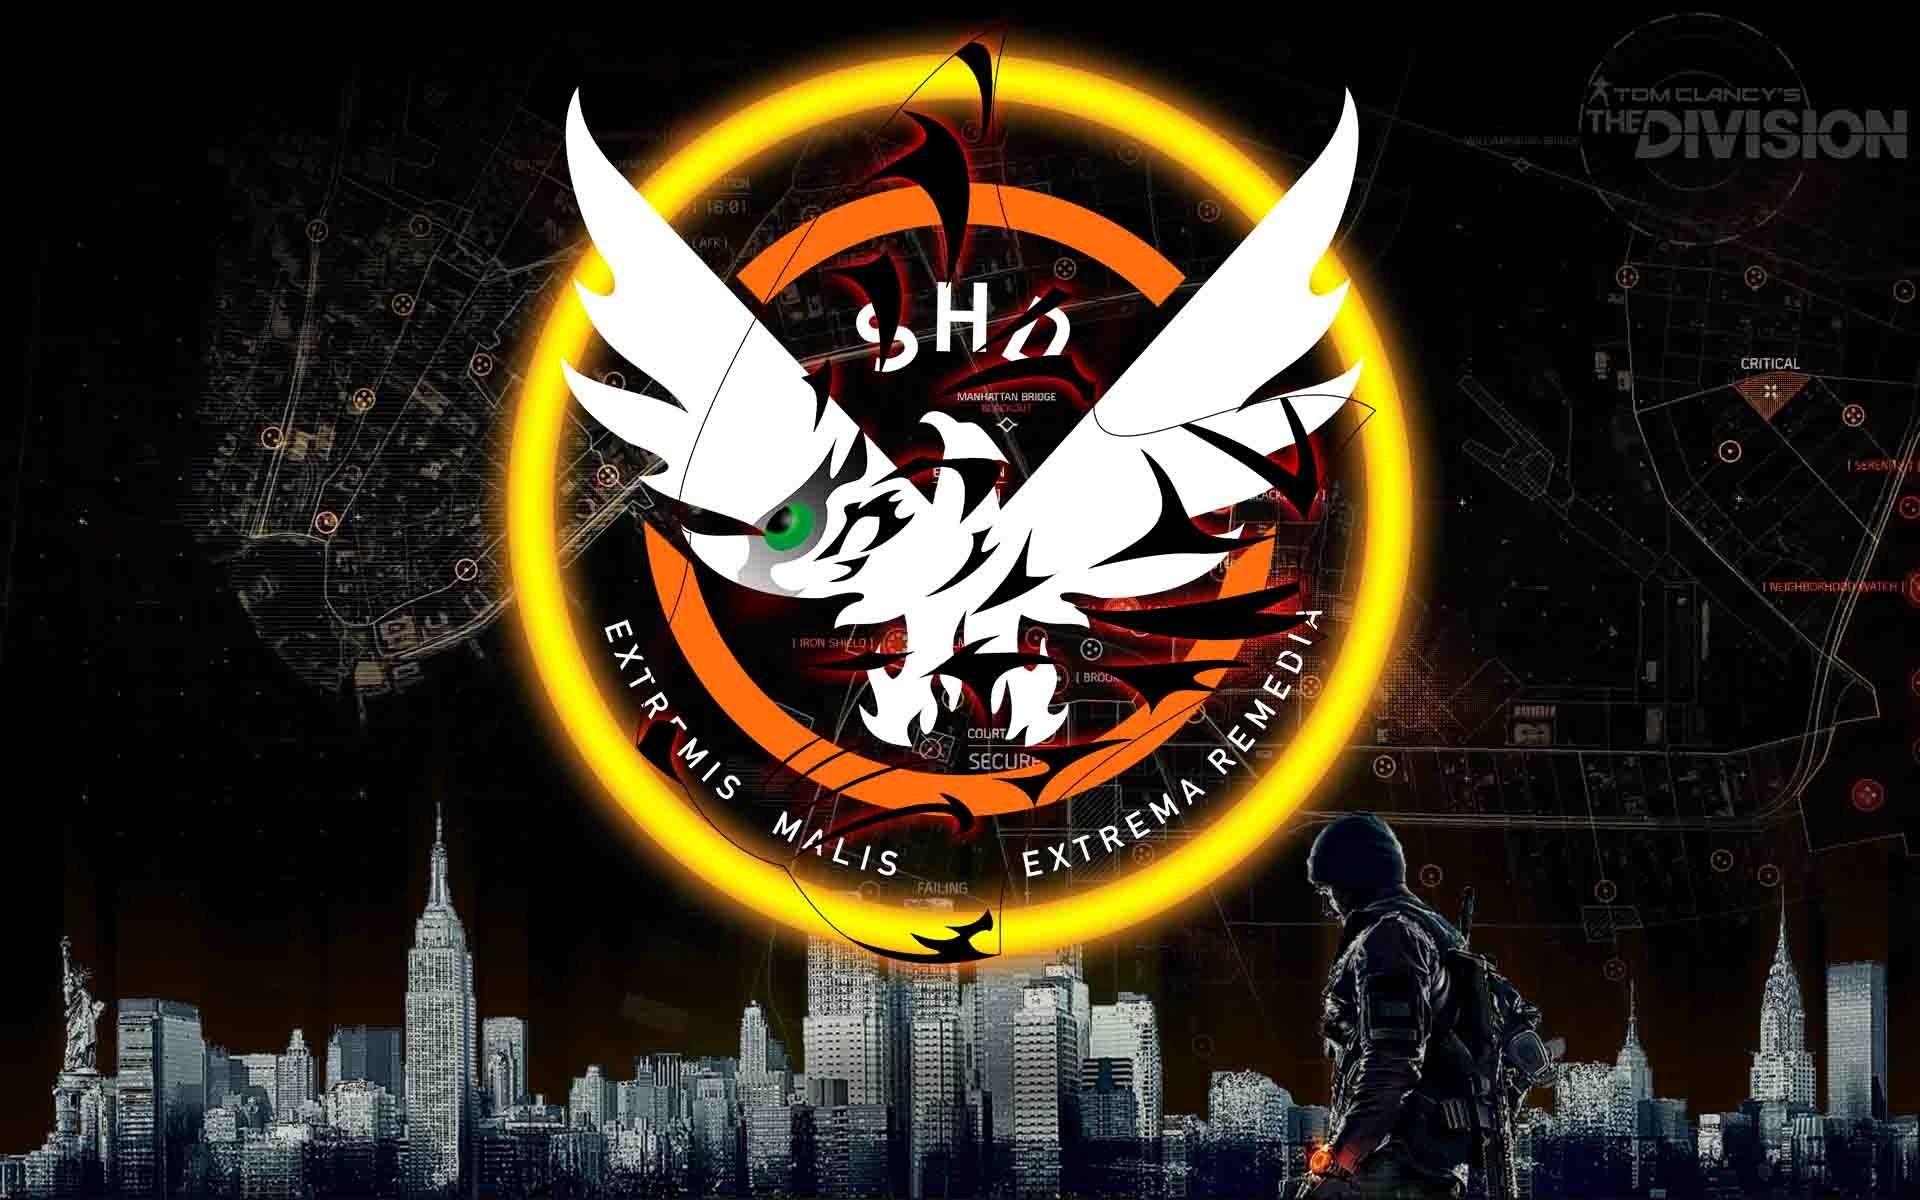 The Division Logo - The Division New logo, Black Beast